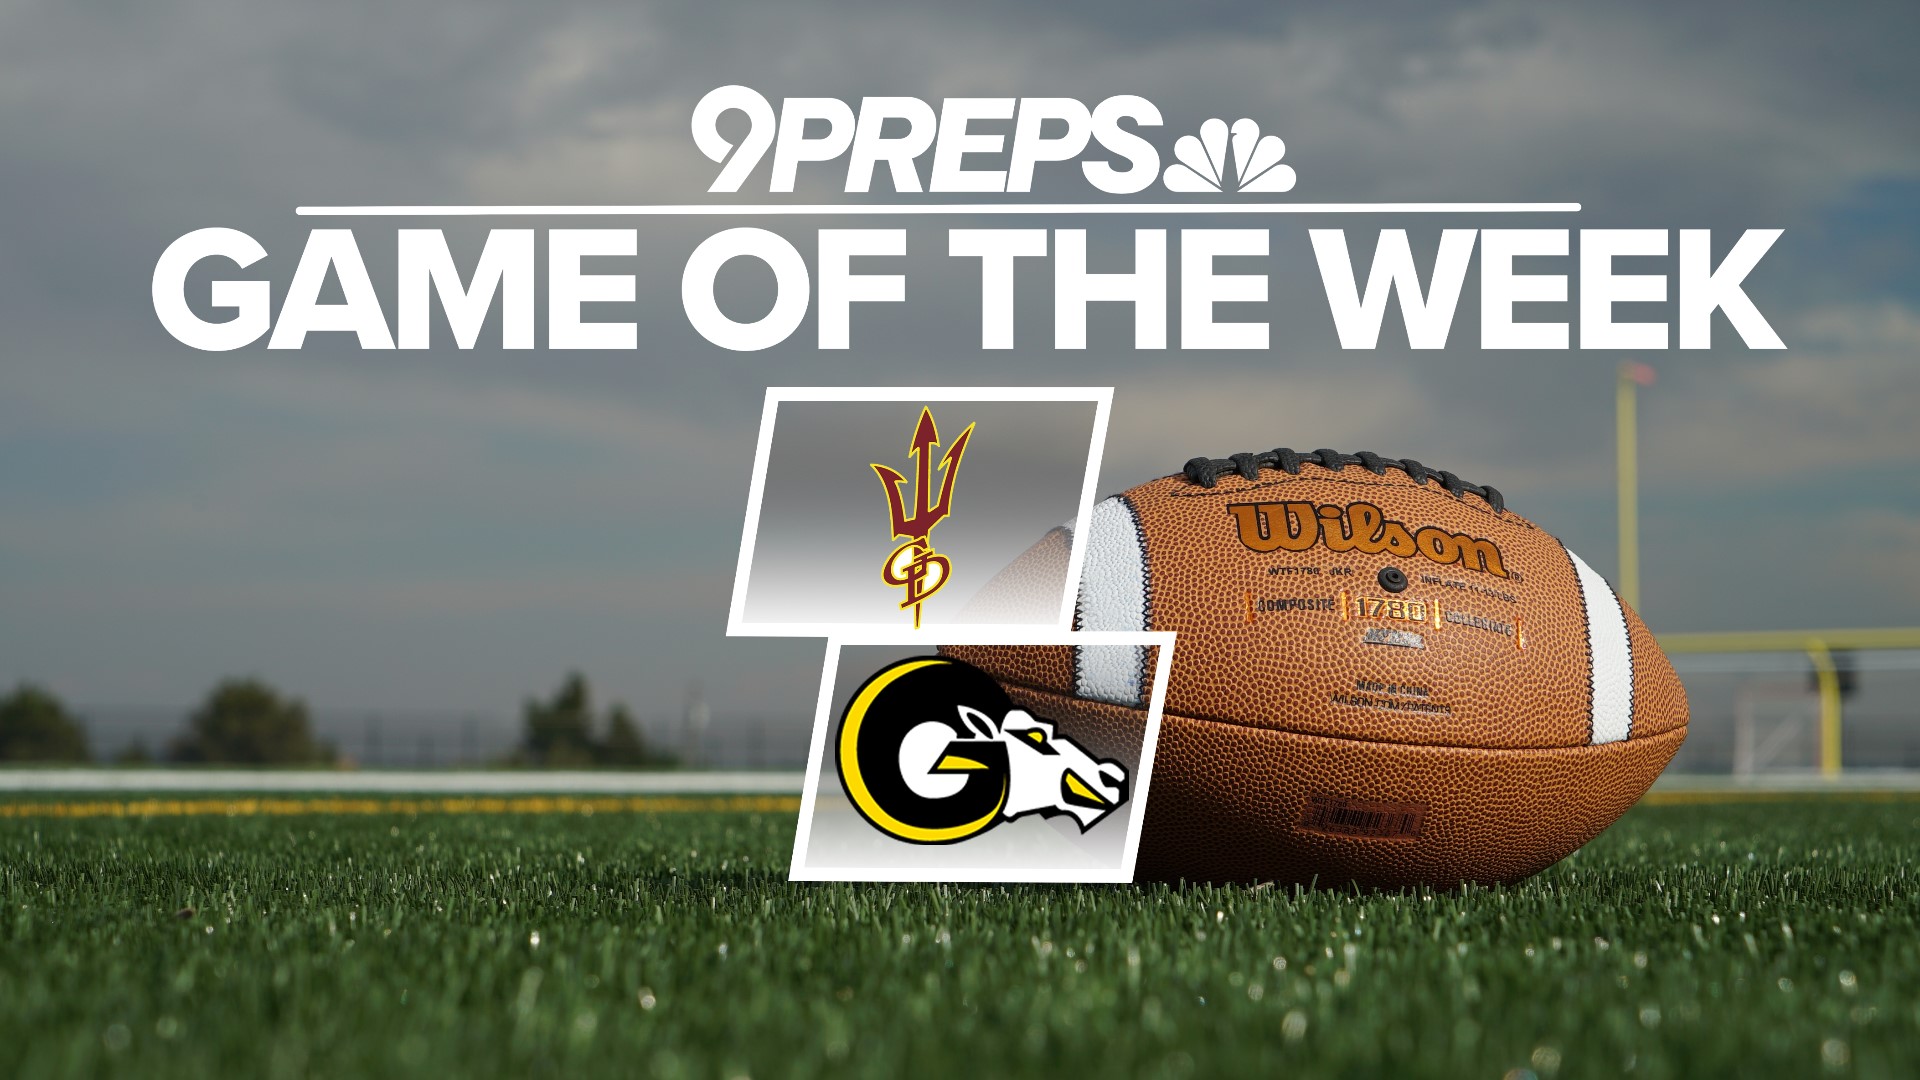 The Rams shut out the Demons 36-0 in the first 9Preps Game of the Week this season.